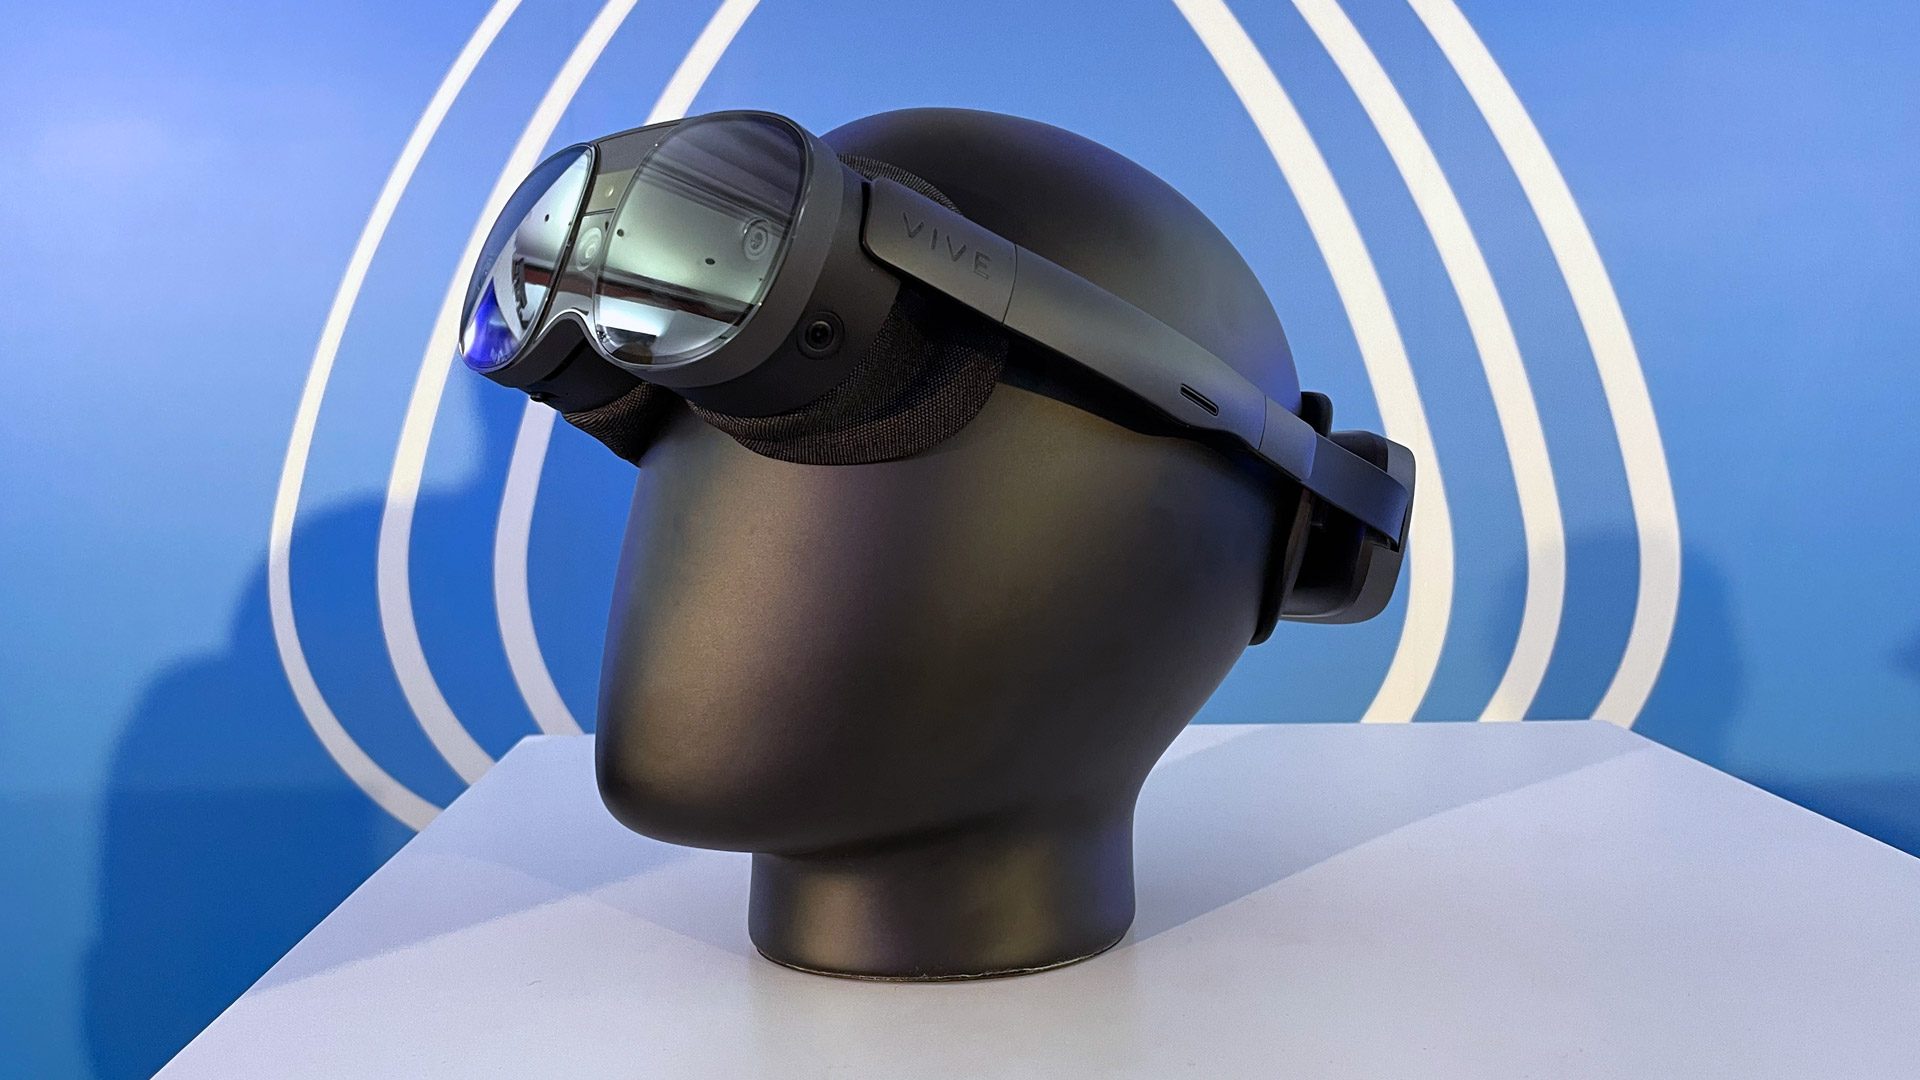 Vive XR Elite Hands-on: Lightweight & Compact, But Shares Quest 